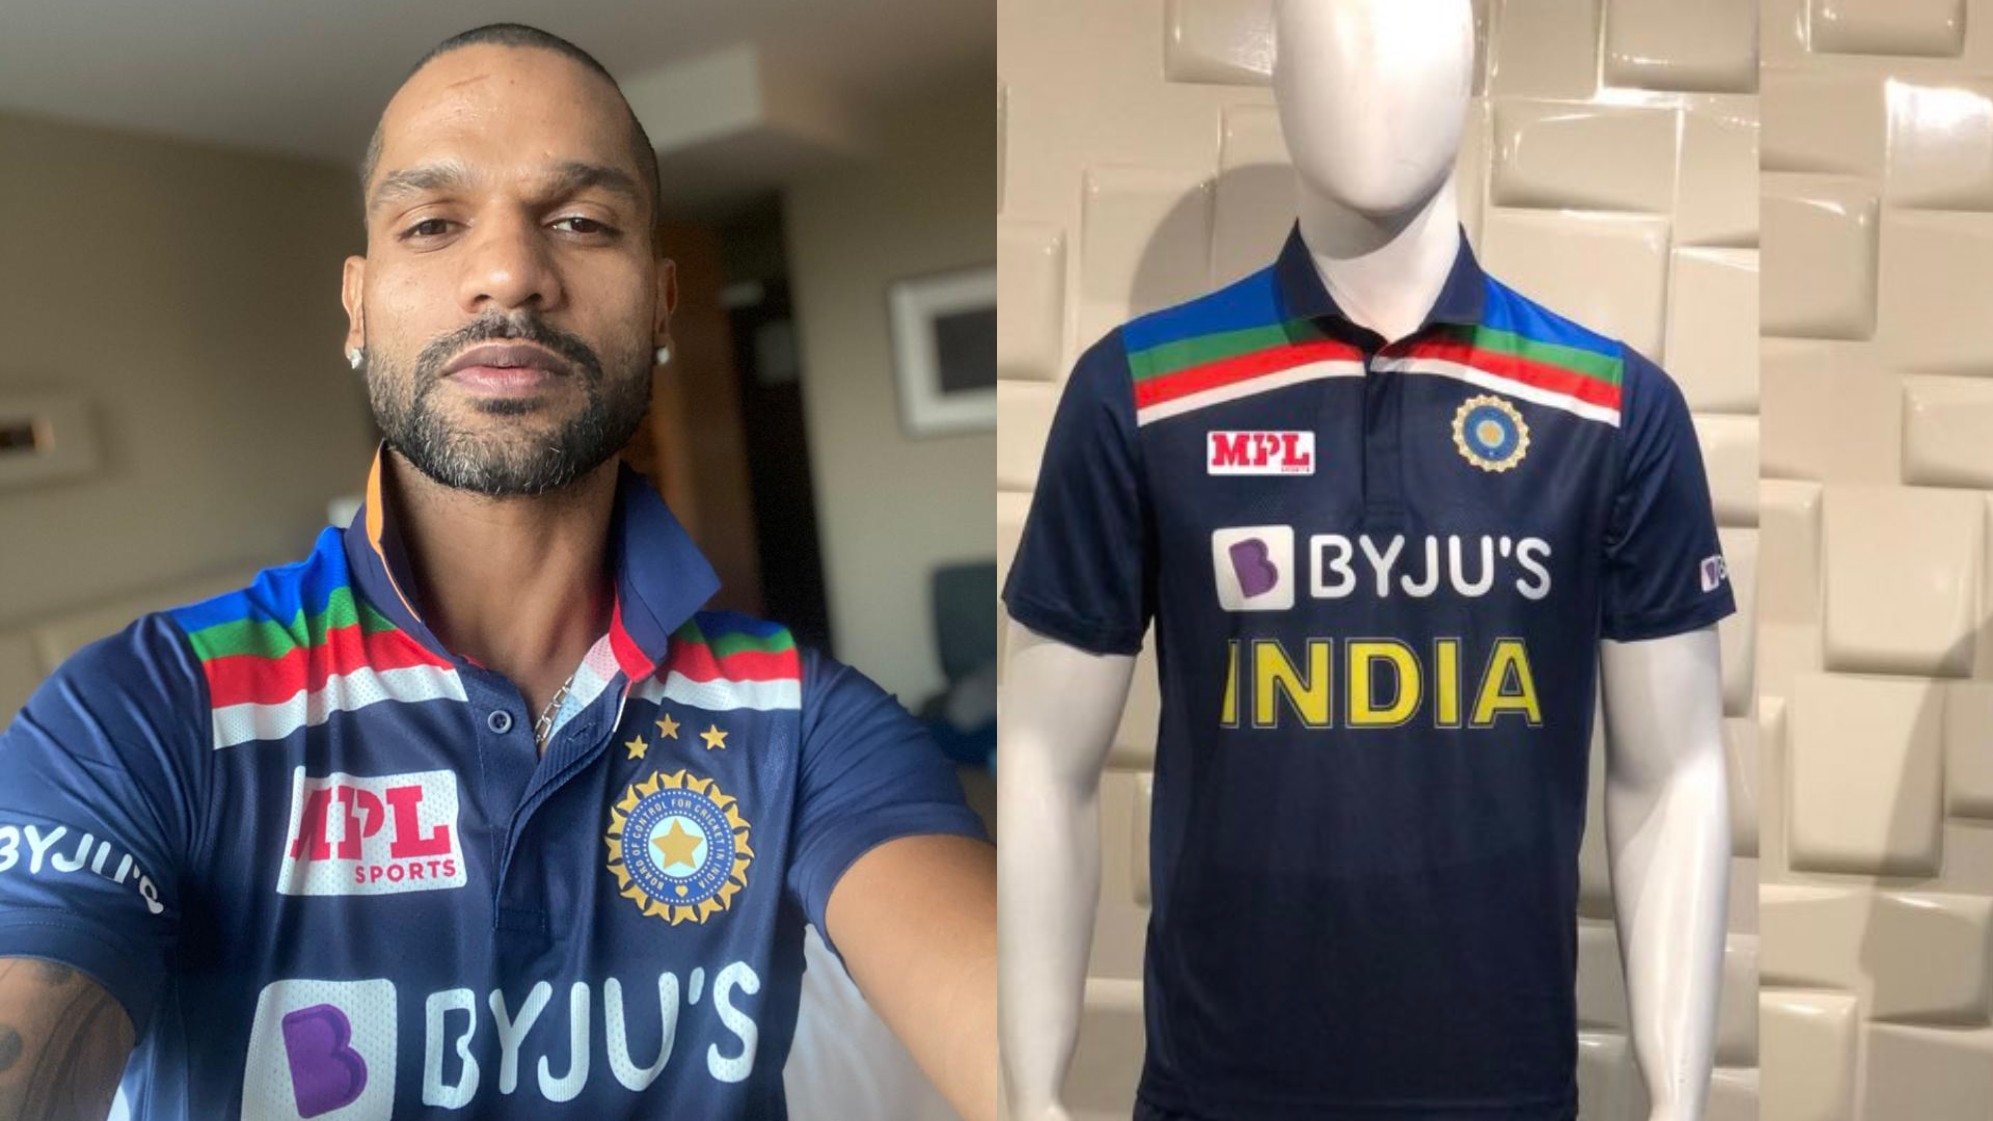 AUS v IND 2020-21: Shikhar Dhawan reveals India’s new-look jersey for Australia white-ball series